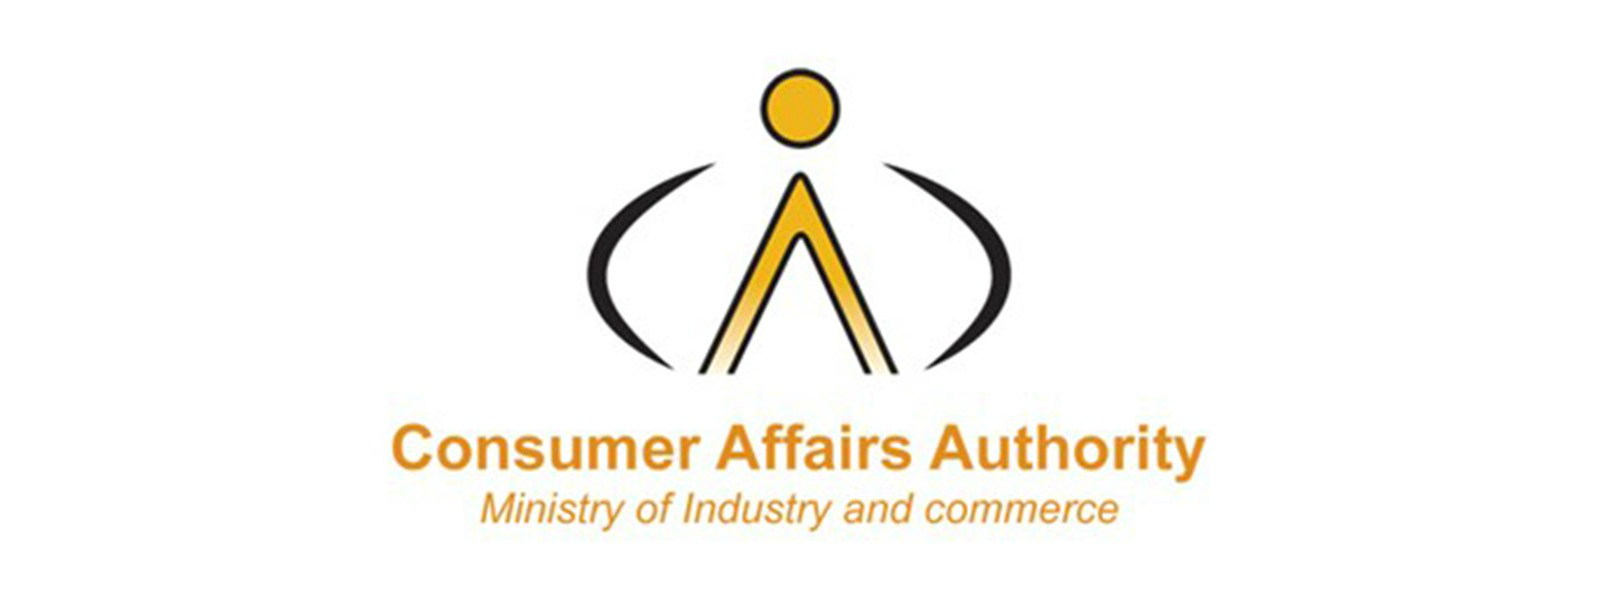 Legal action against over 1000 shop owners - CAA